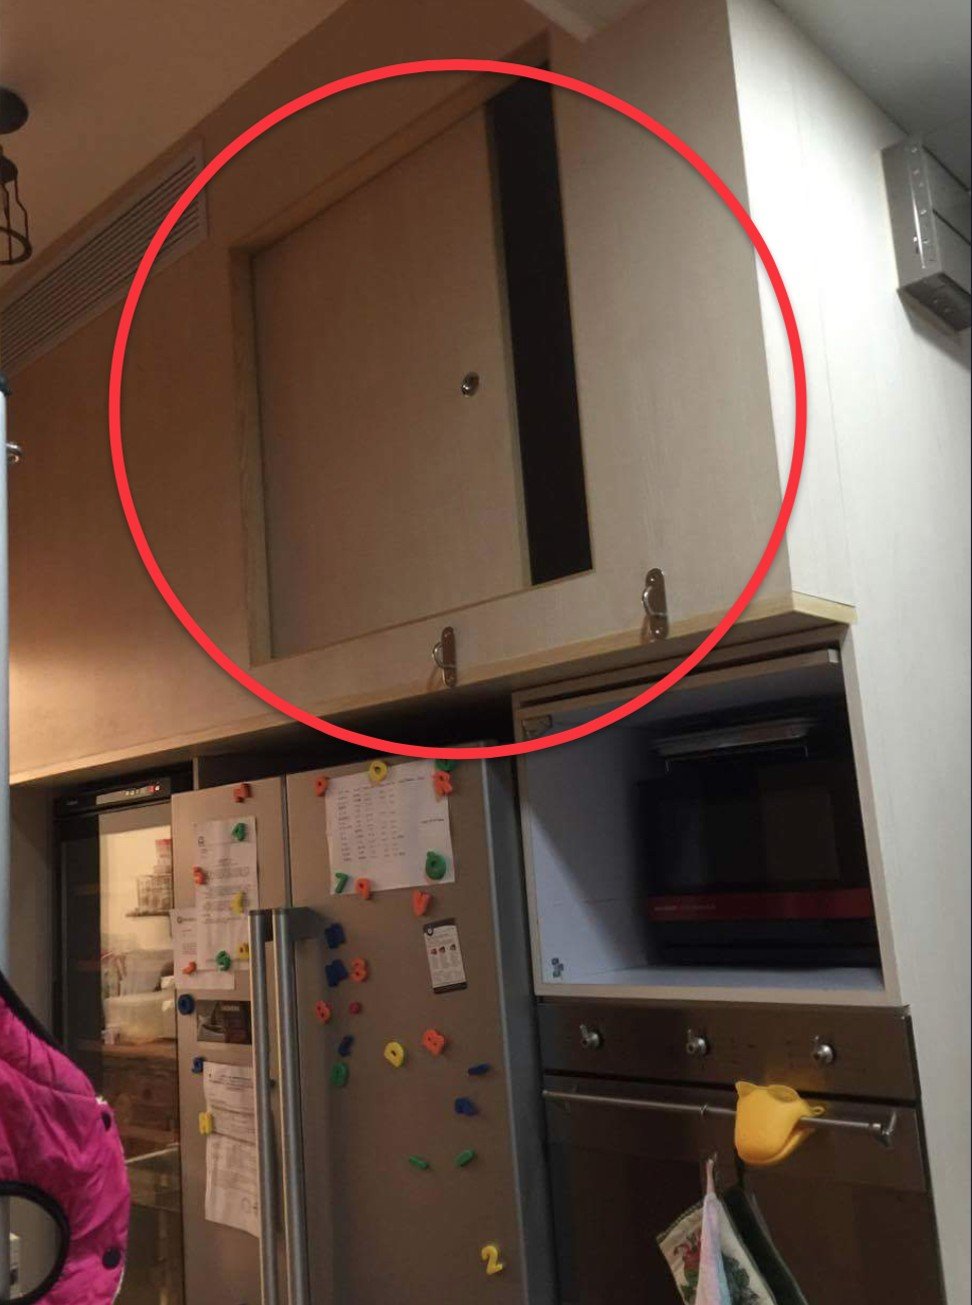 A helper’s bed was fitted into a kitchen cupboard above the fridge and microwave oven. Photo: Handout